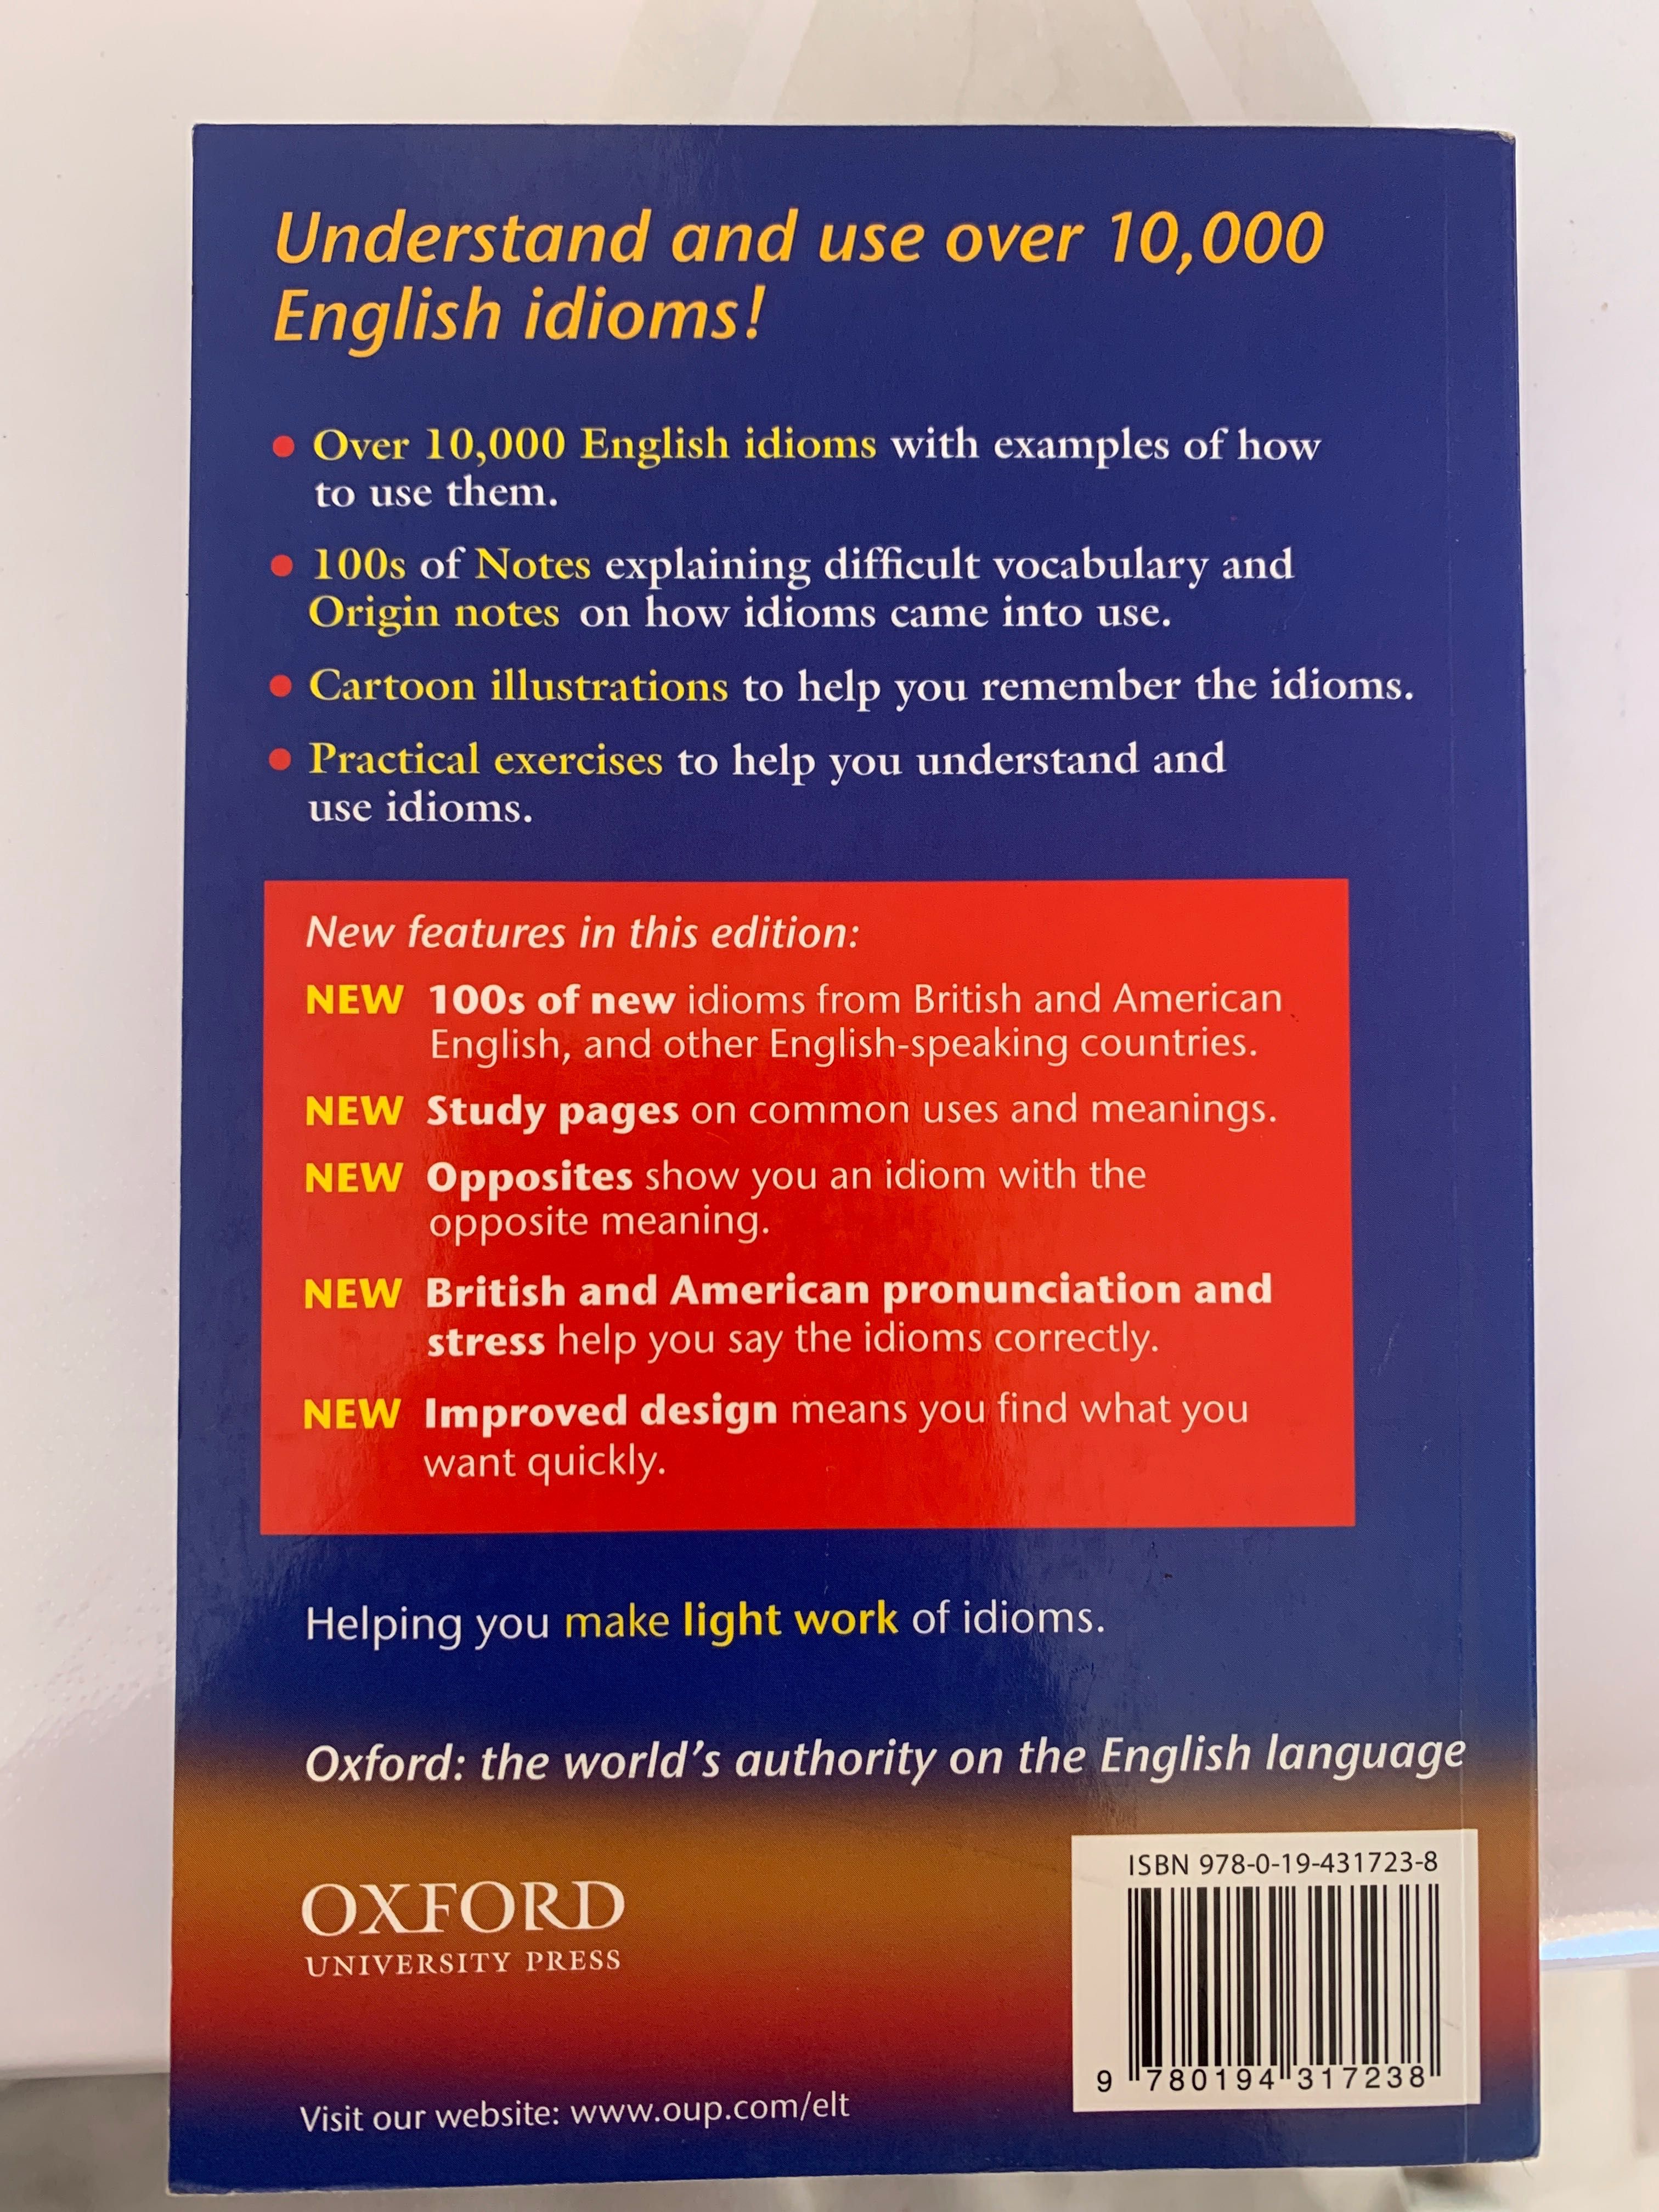 Oxford idioms, книга новая, dictionary for learners of English